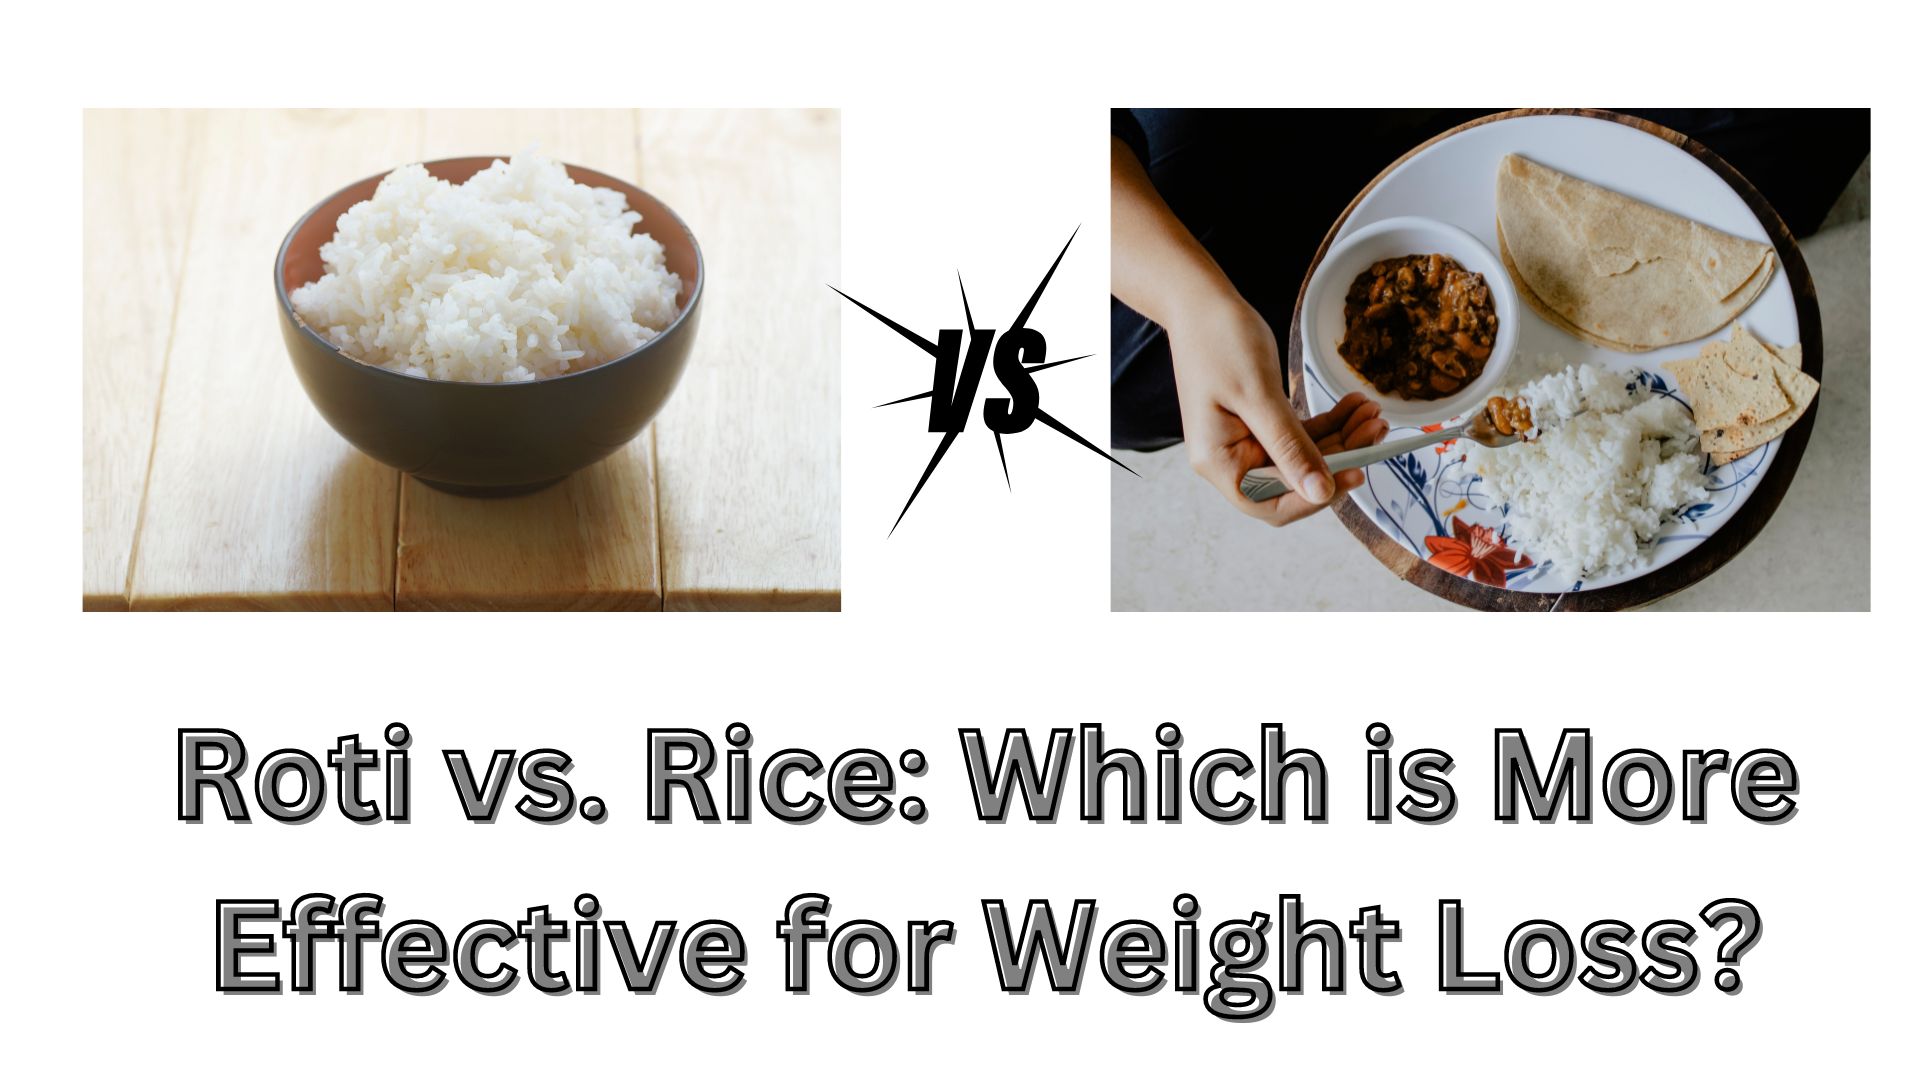 Roti vs. Rice: Which is More Effective for Weight Loss?